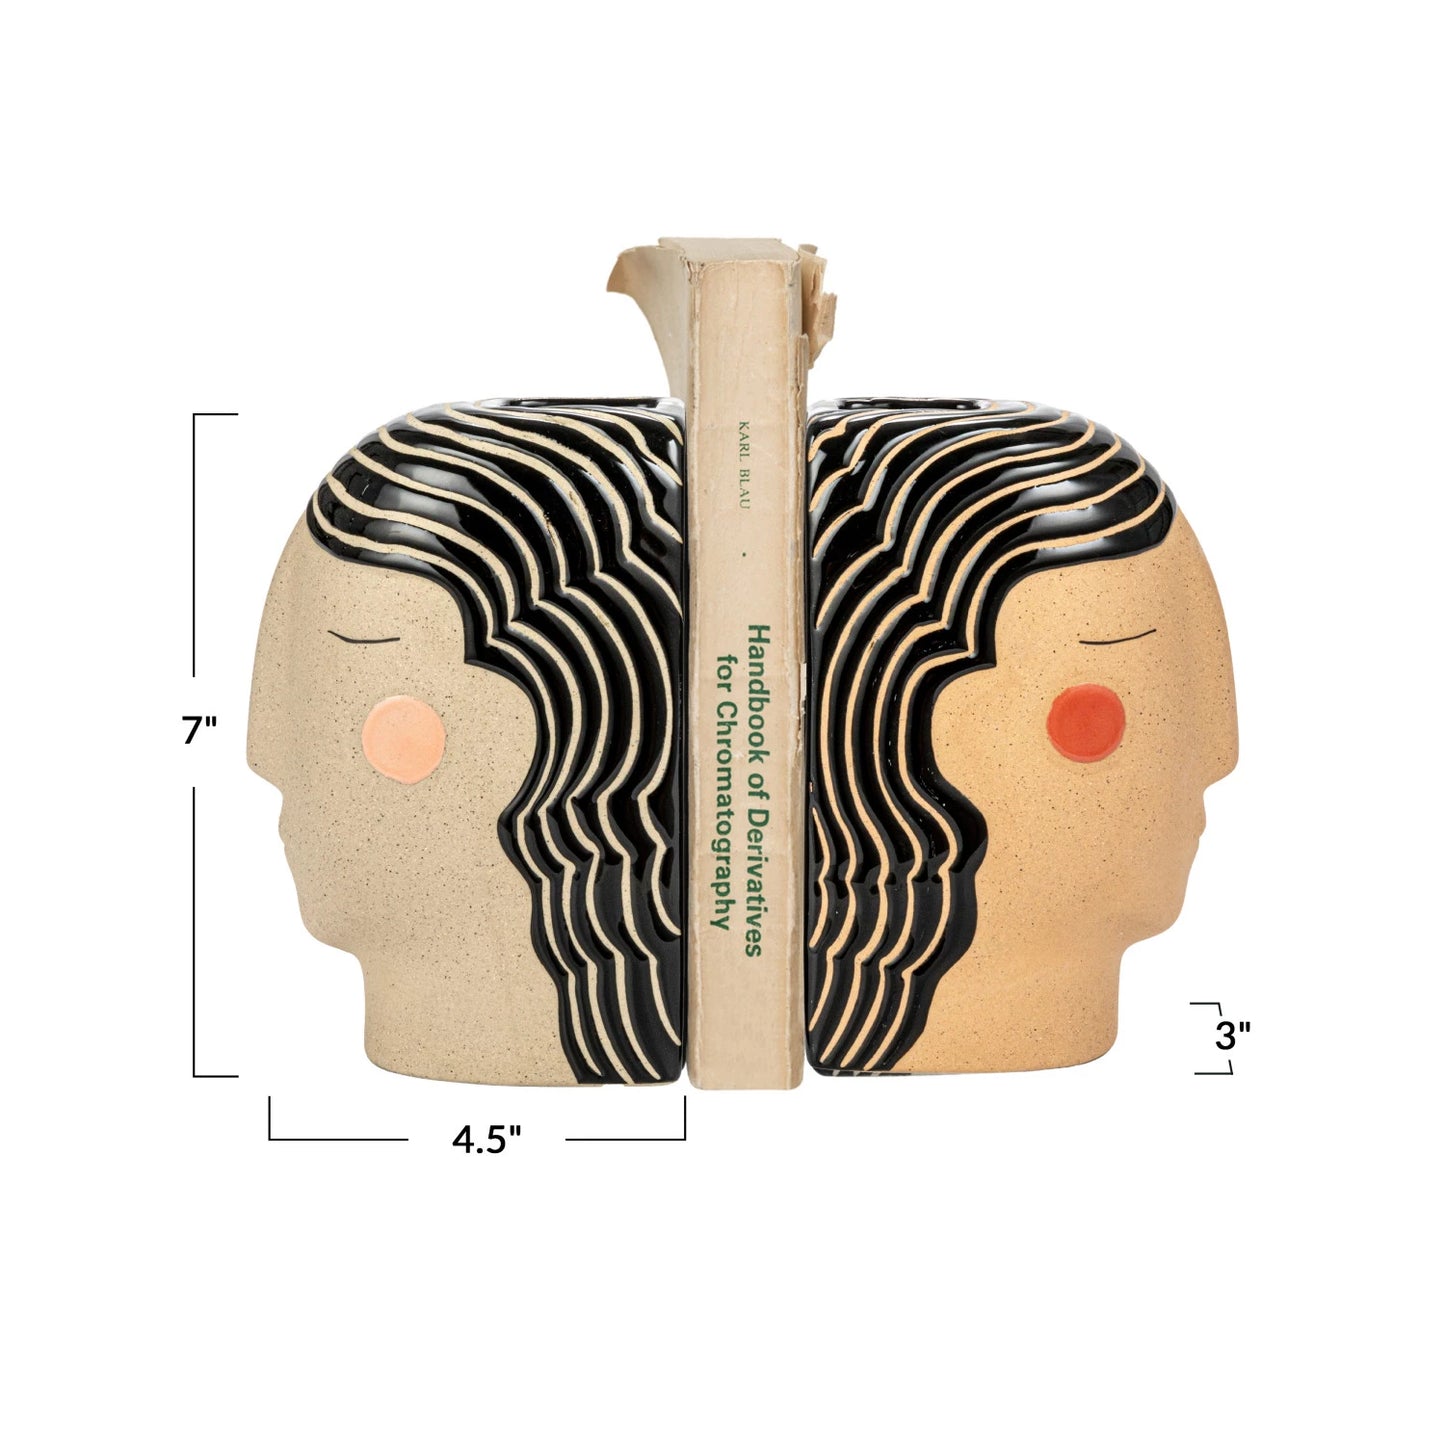 Painted Head Vase/Bookend